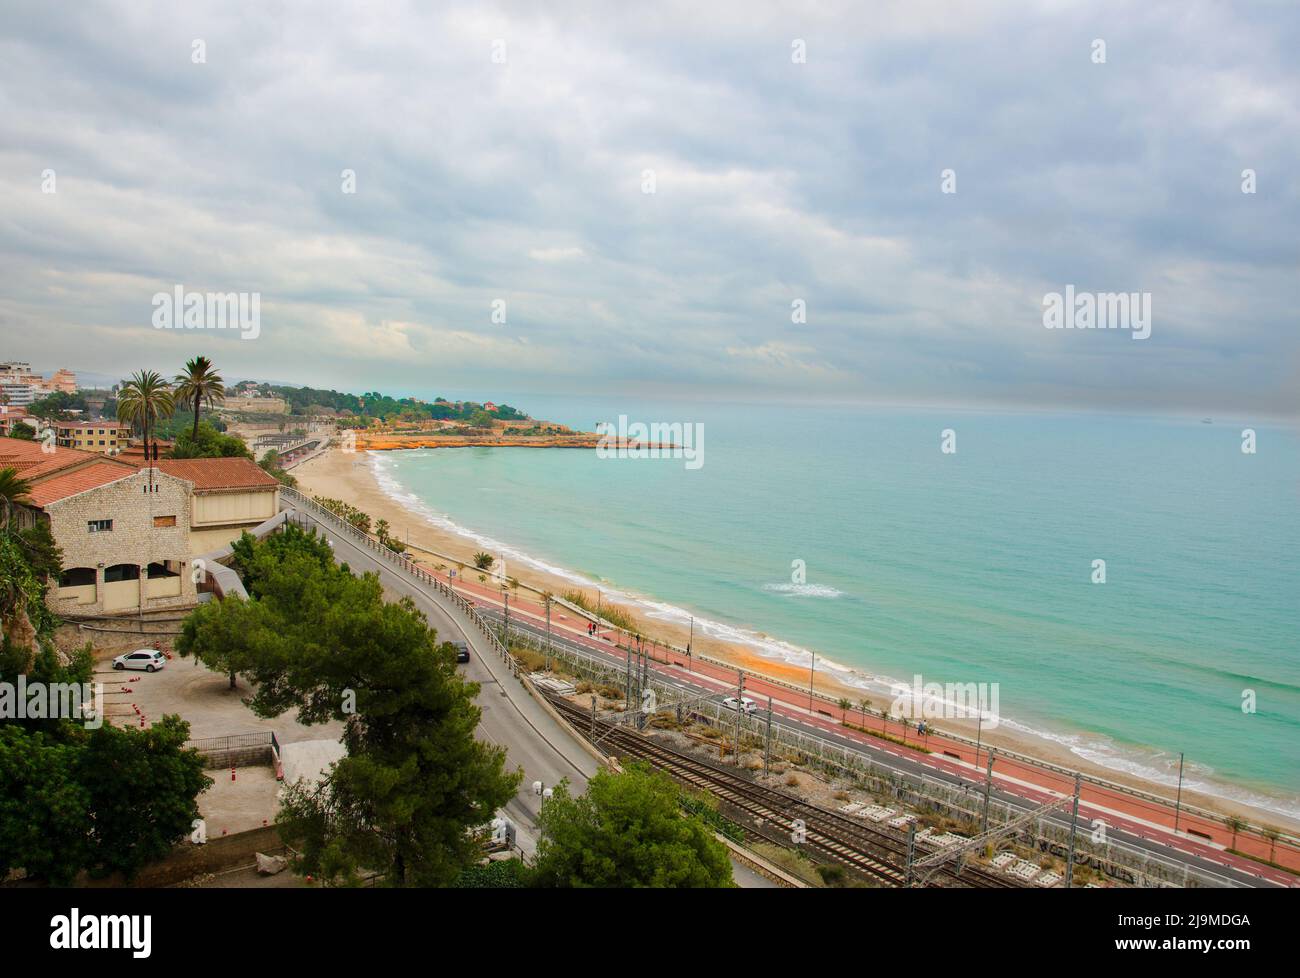 Landscape coastline of Costa Dorada surroundings of Salou - sea, beach, palms and tiled roofs of houses, view of with Mediterranean Balcony Stock Photo